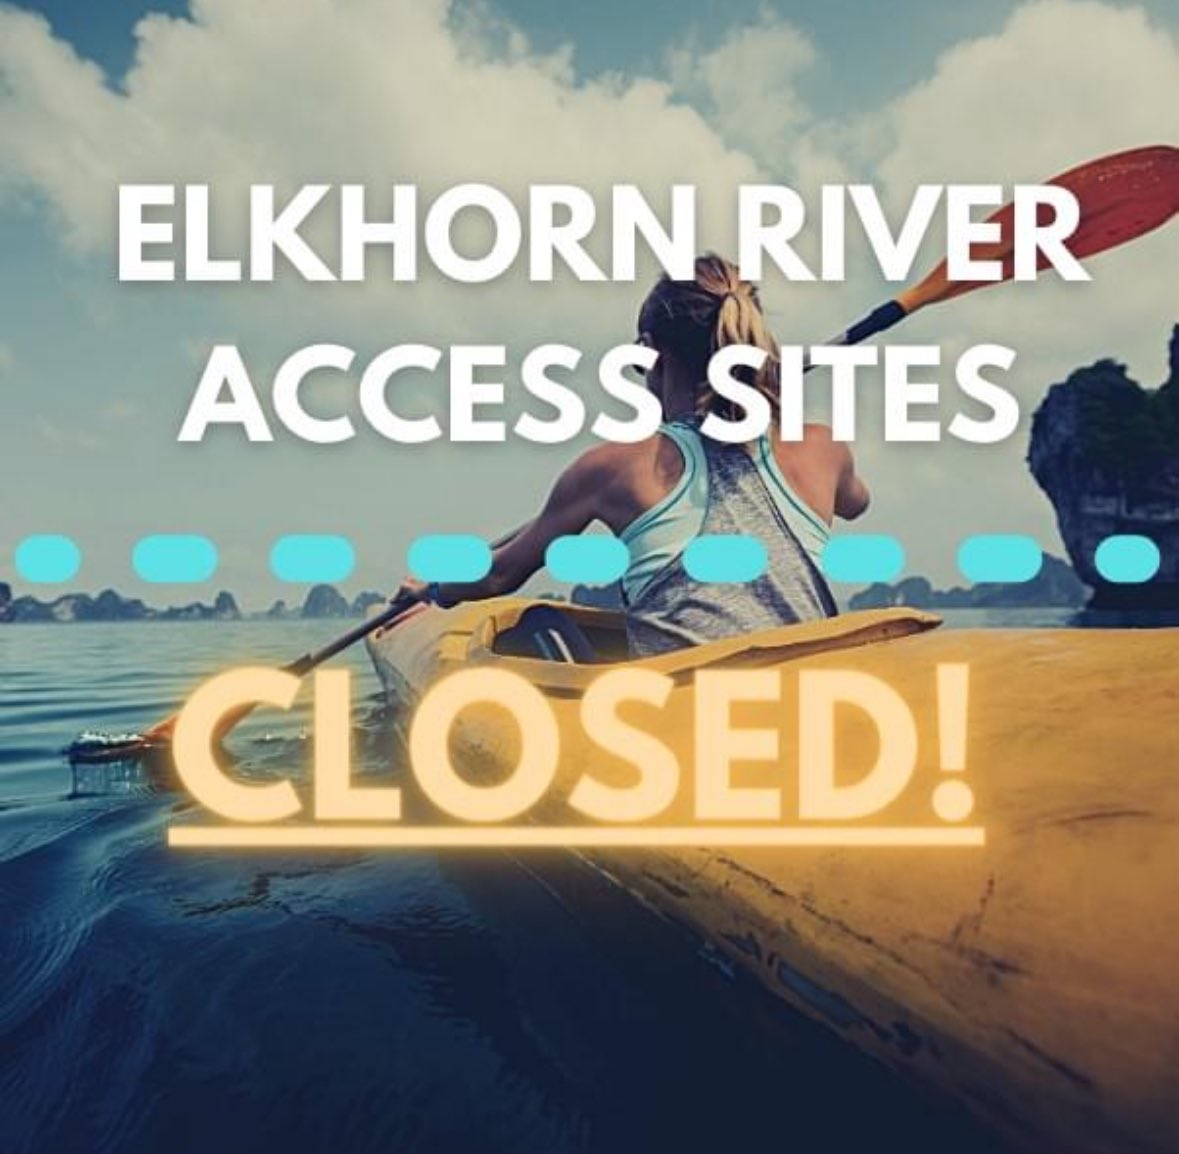 All Elkhorn River access sites are now closed due to high river flows headed our way. We will keep you posted on when they reopen.